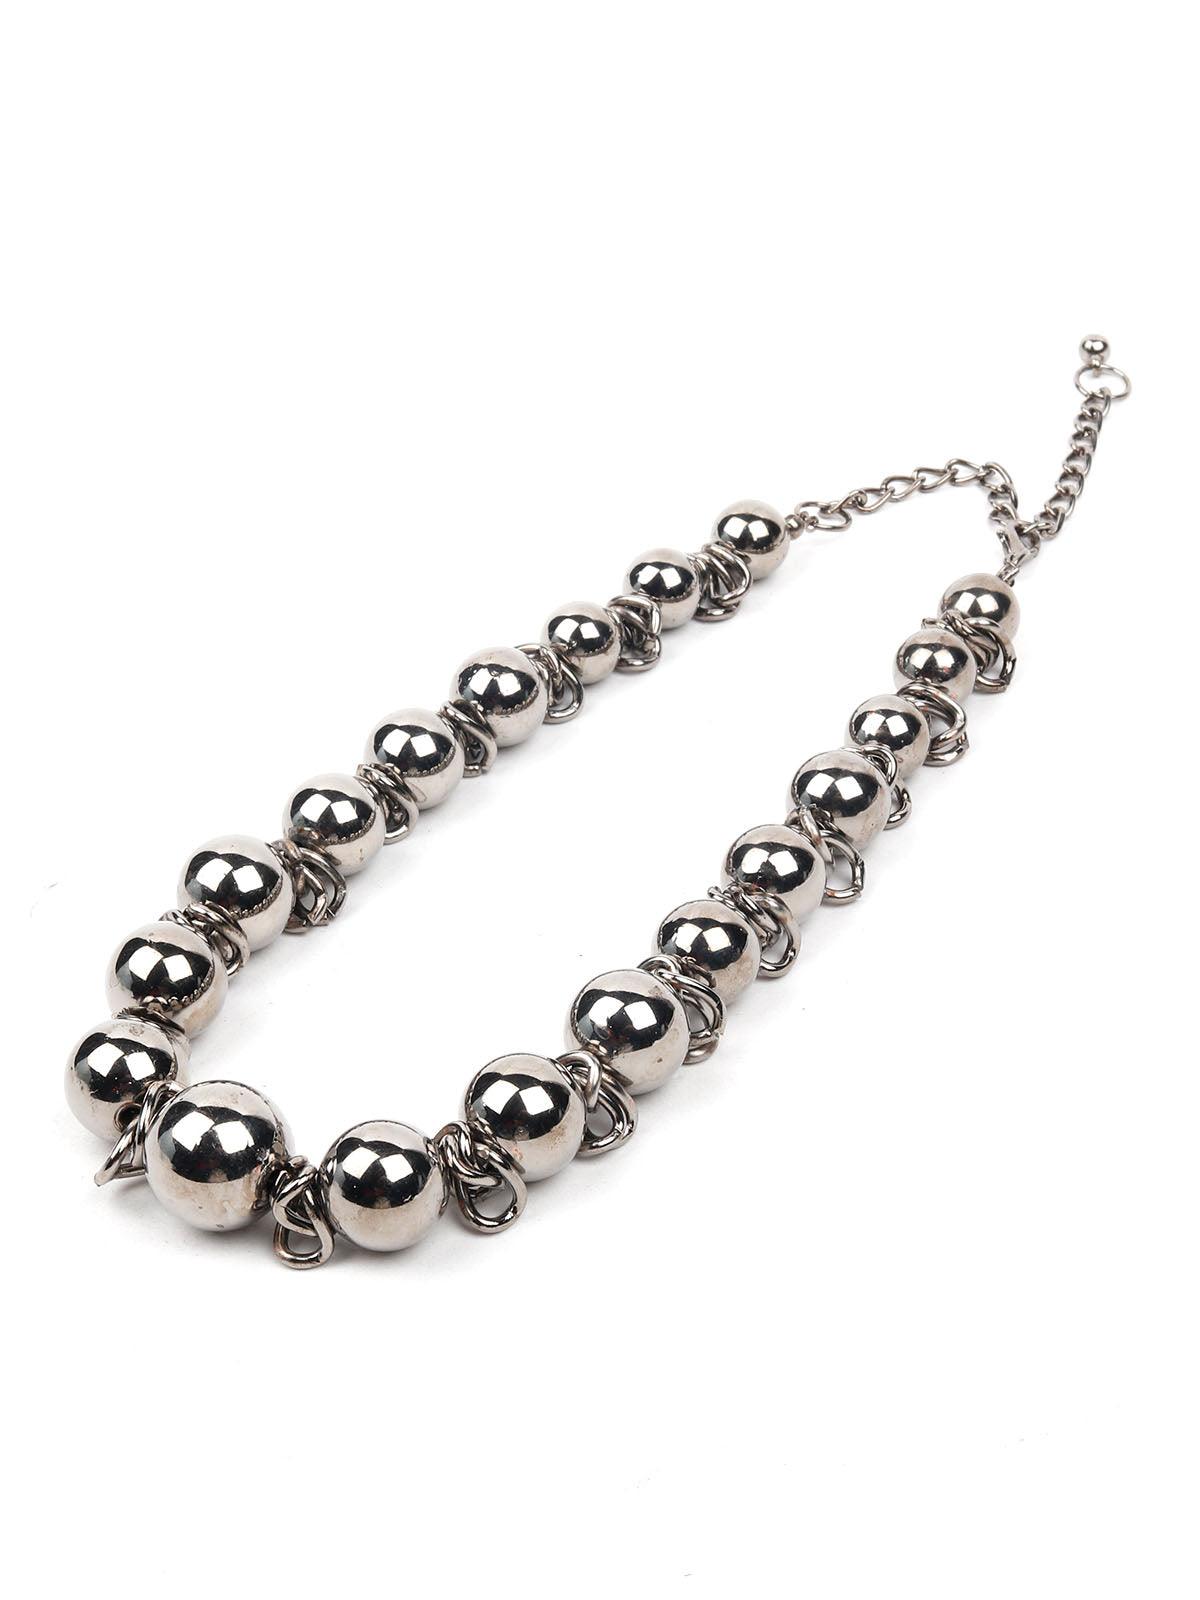 Women's Rounded Silver Statement Necklace - Odette